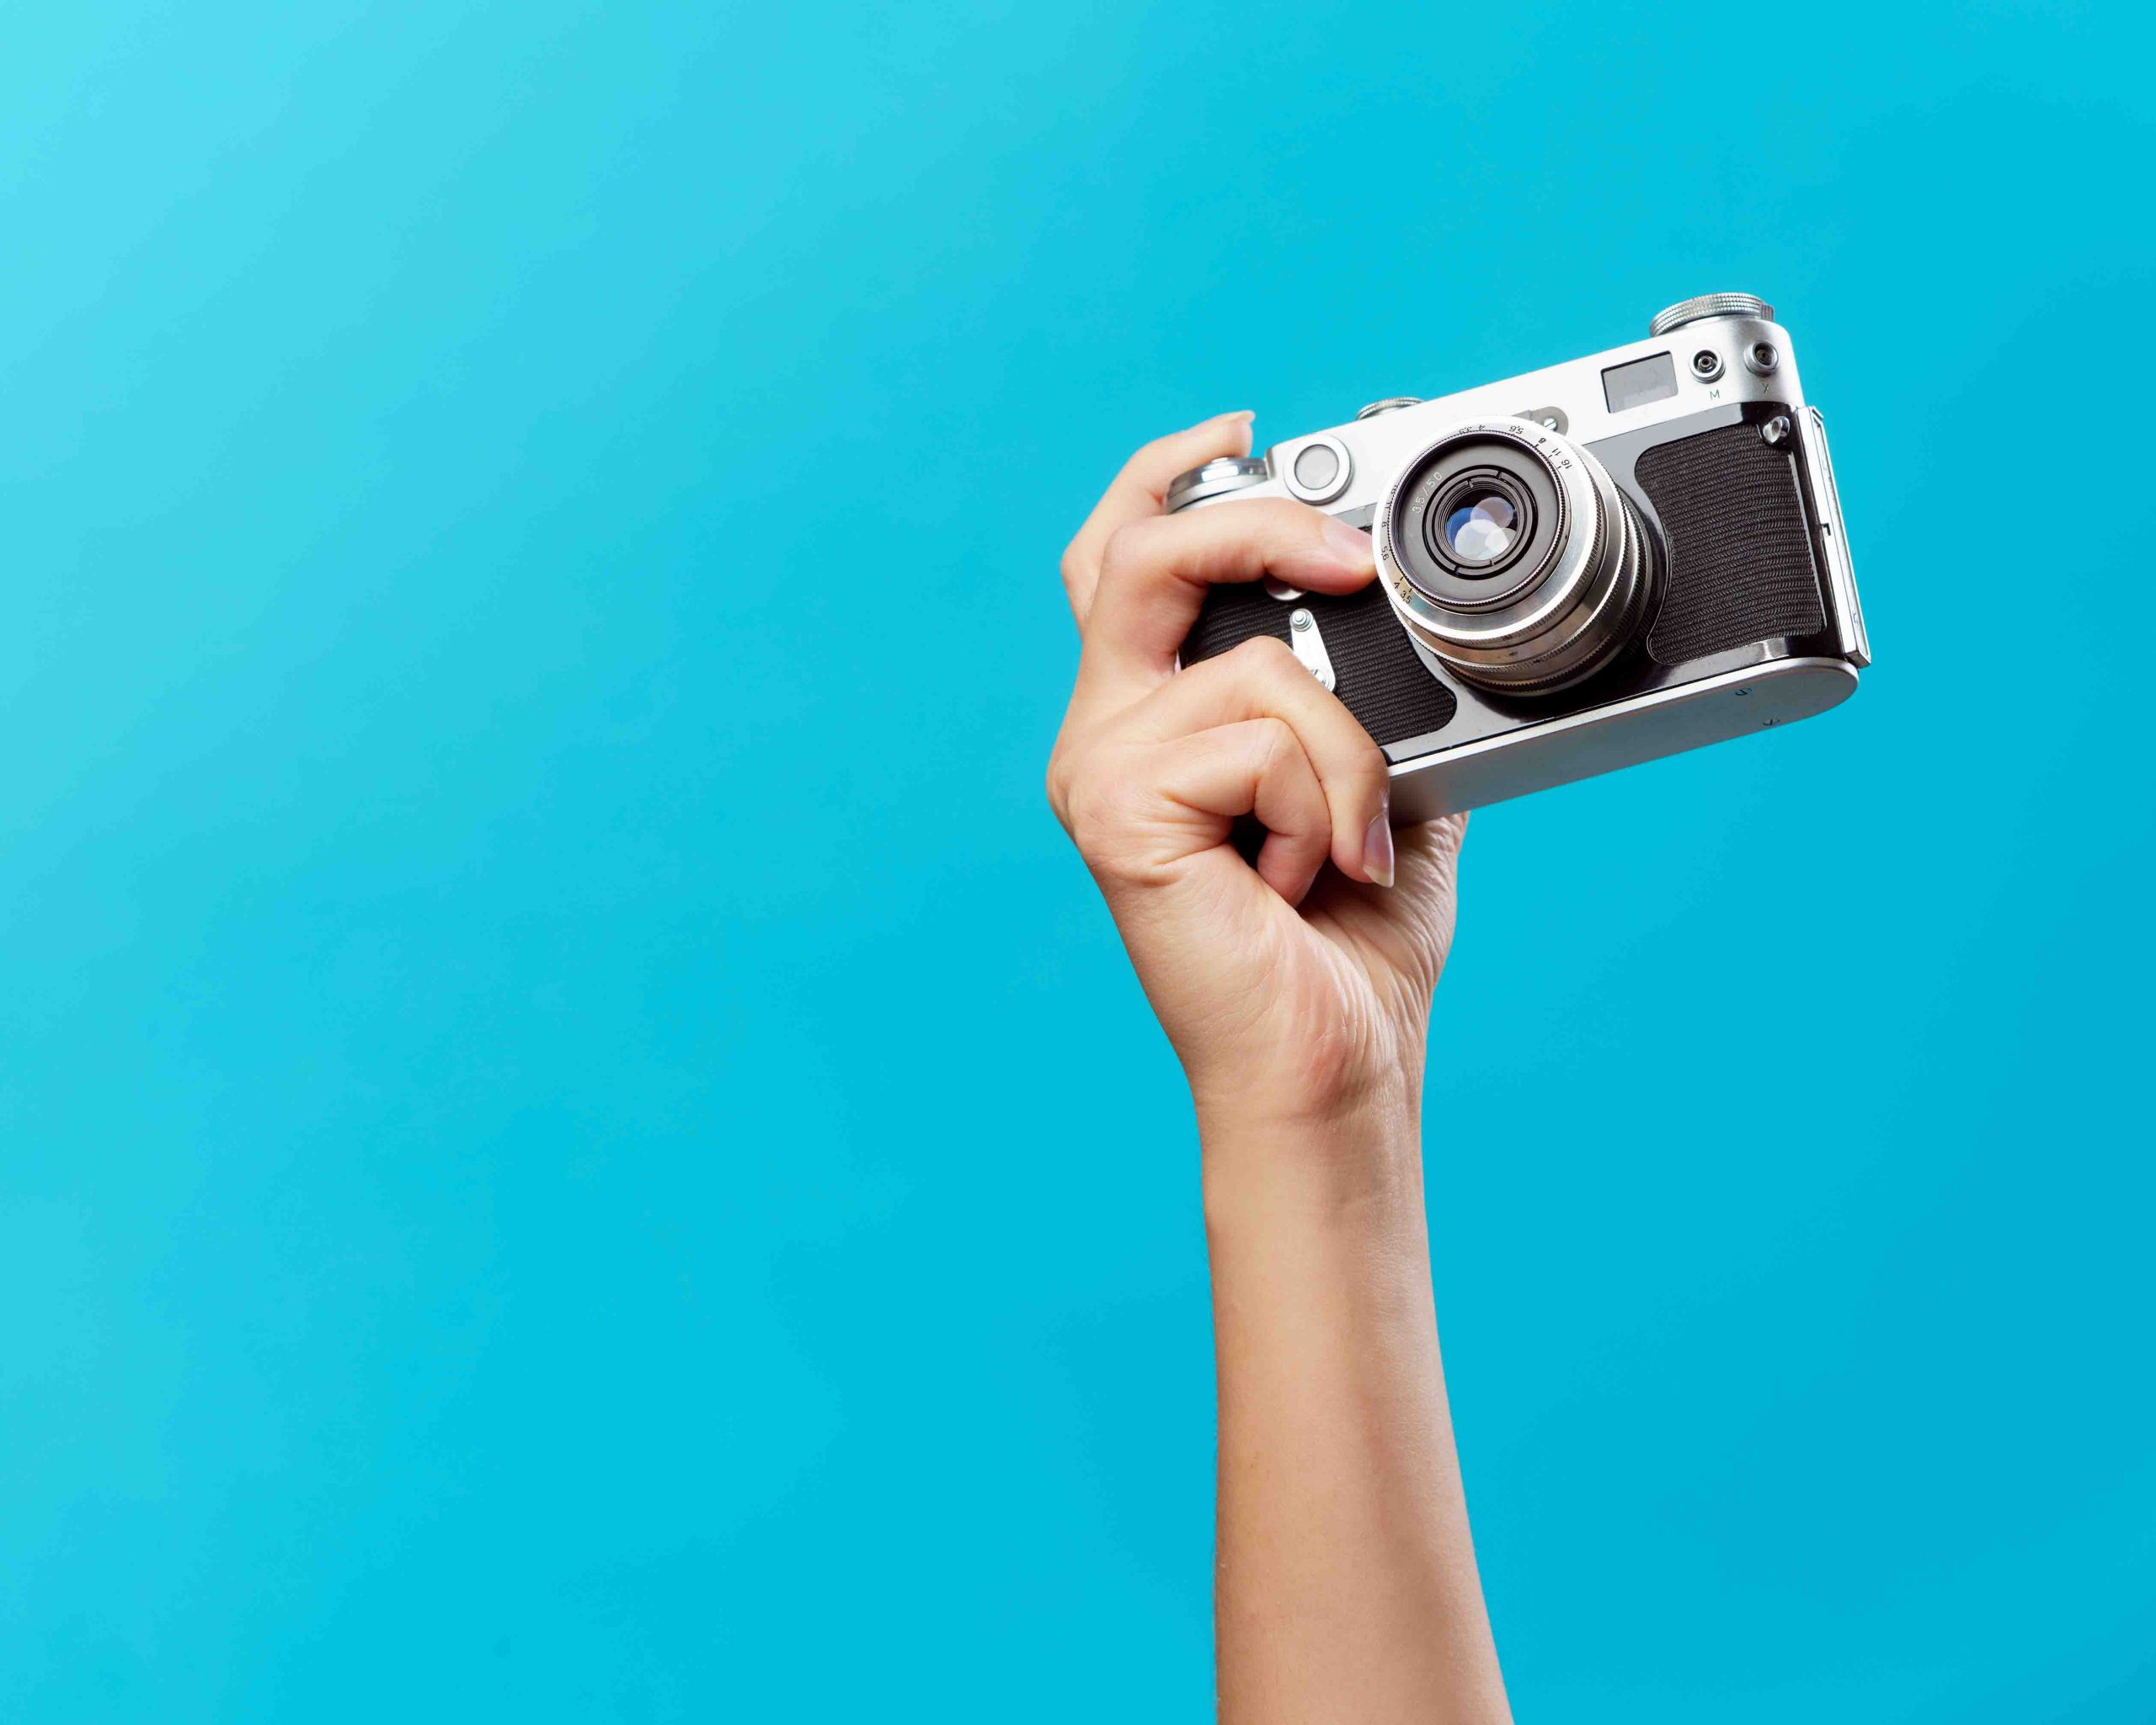 Image of a hand holding a camera up on a blue background